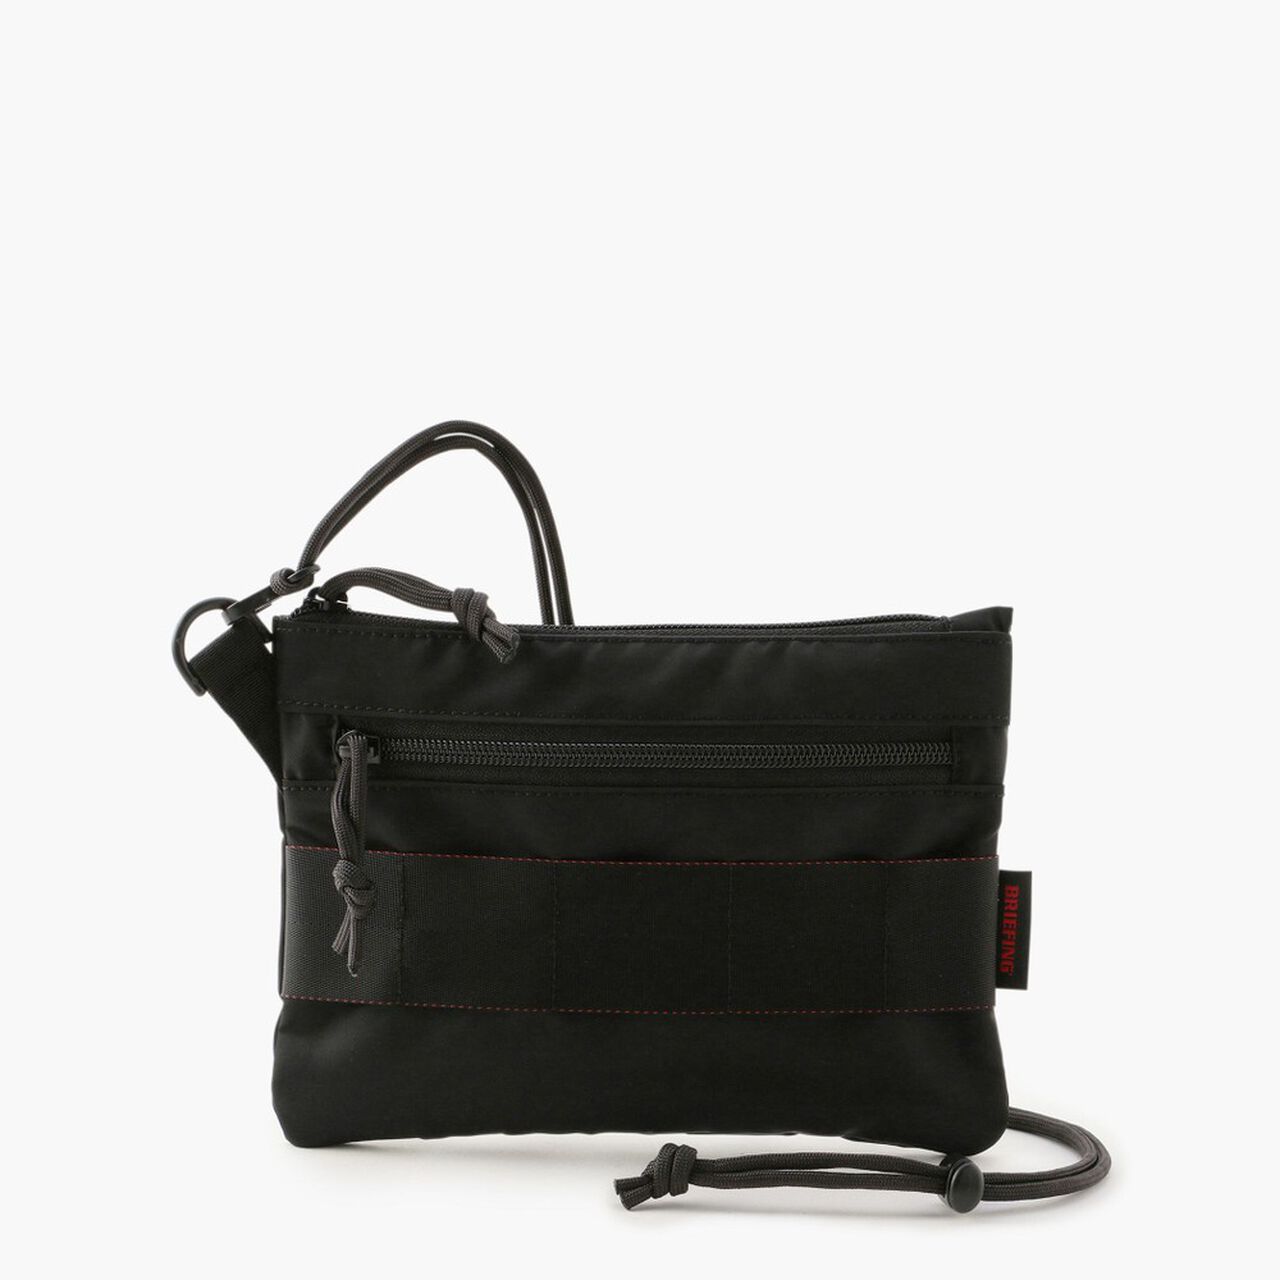 FLAT POUCH,Black, large image number 0